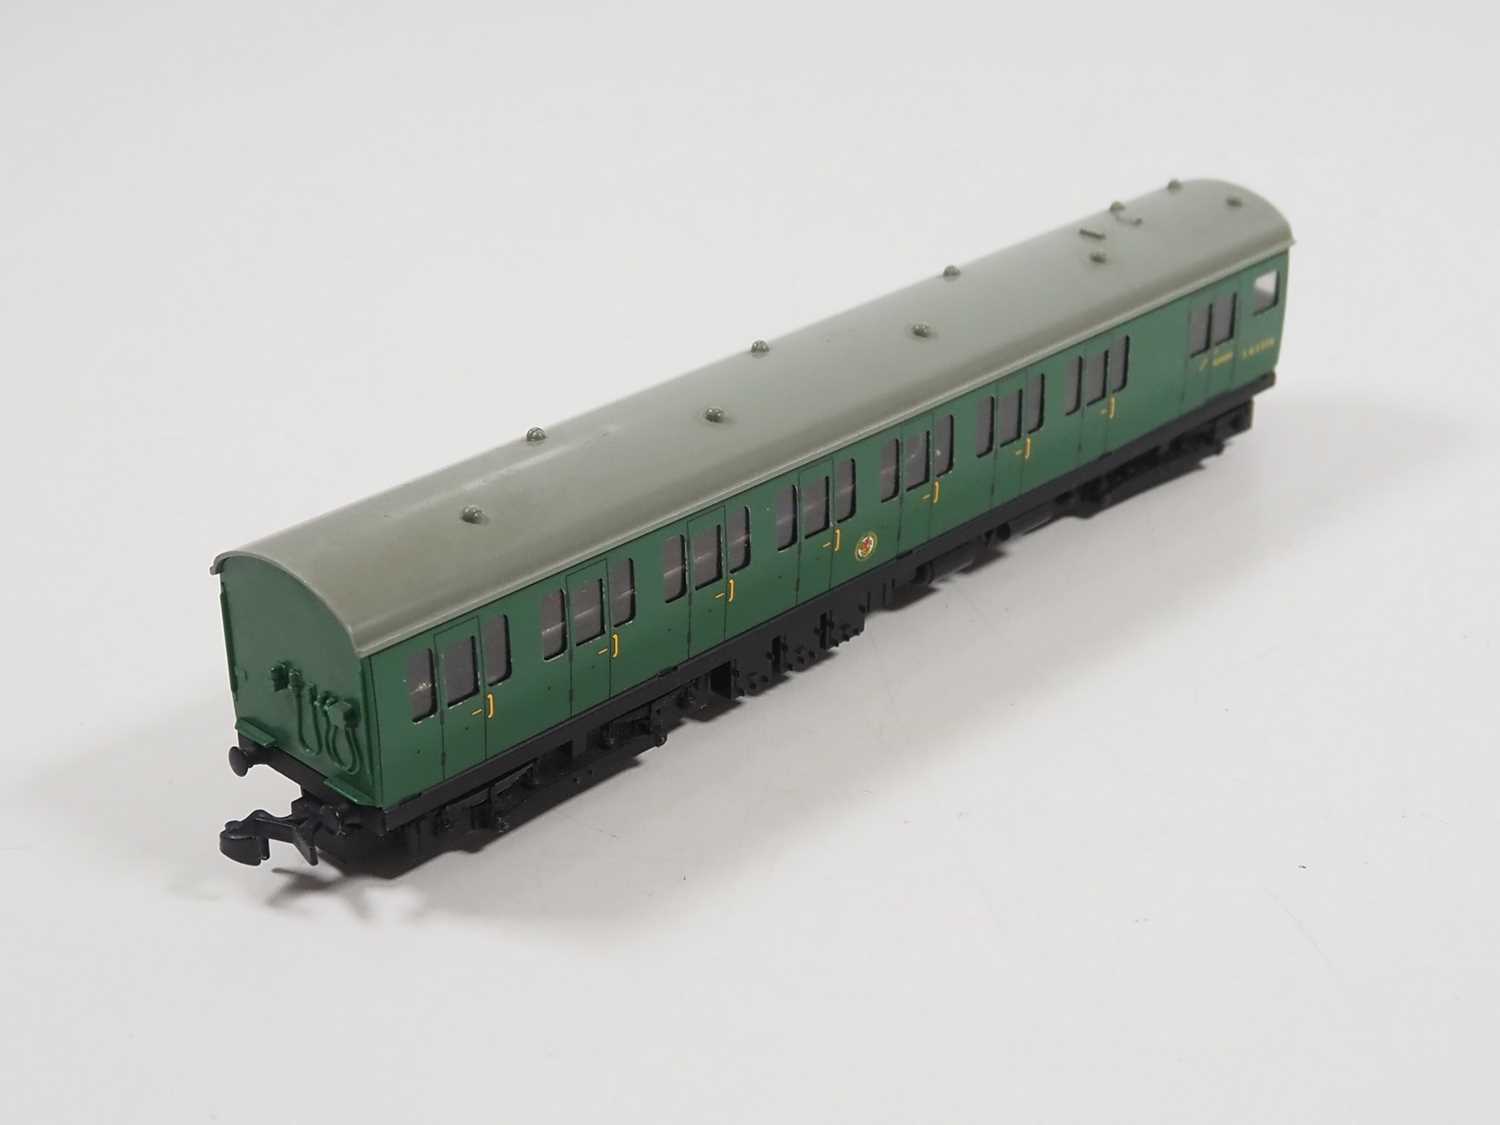 A HORNBY DUBLO 3250/4150 3-rail OO gauge BR(S) Electric Motor Coach with Driving Trailer 2 car EMU - Image 6 of 9